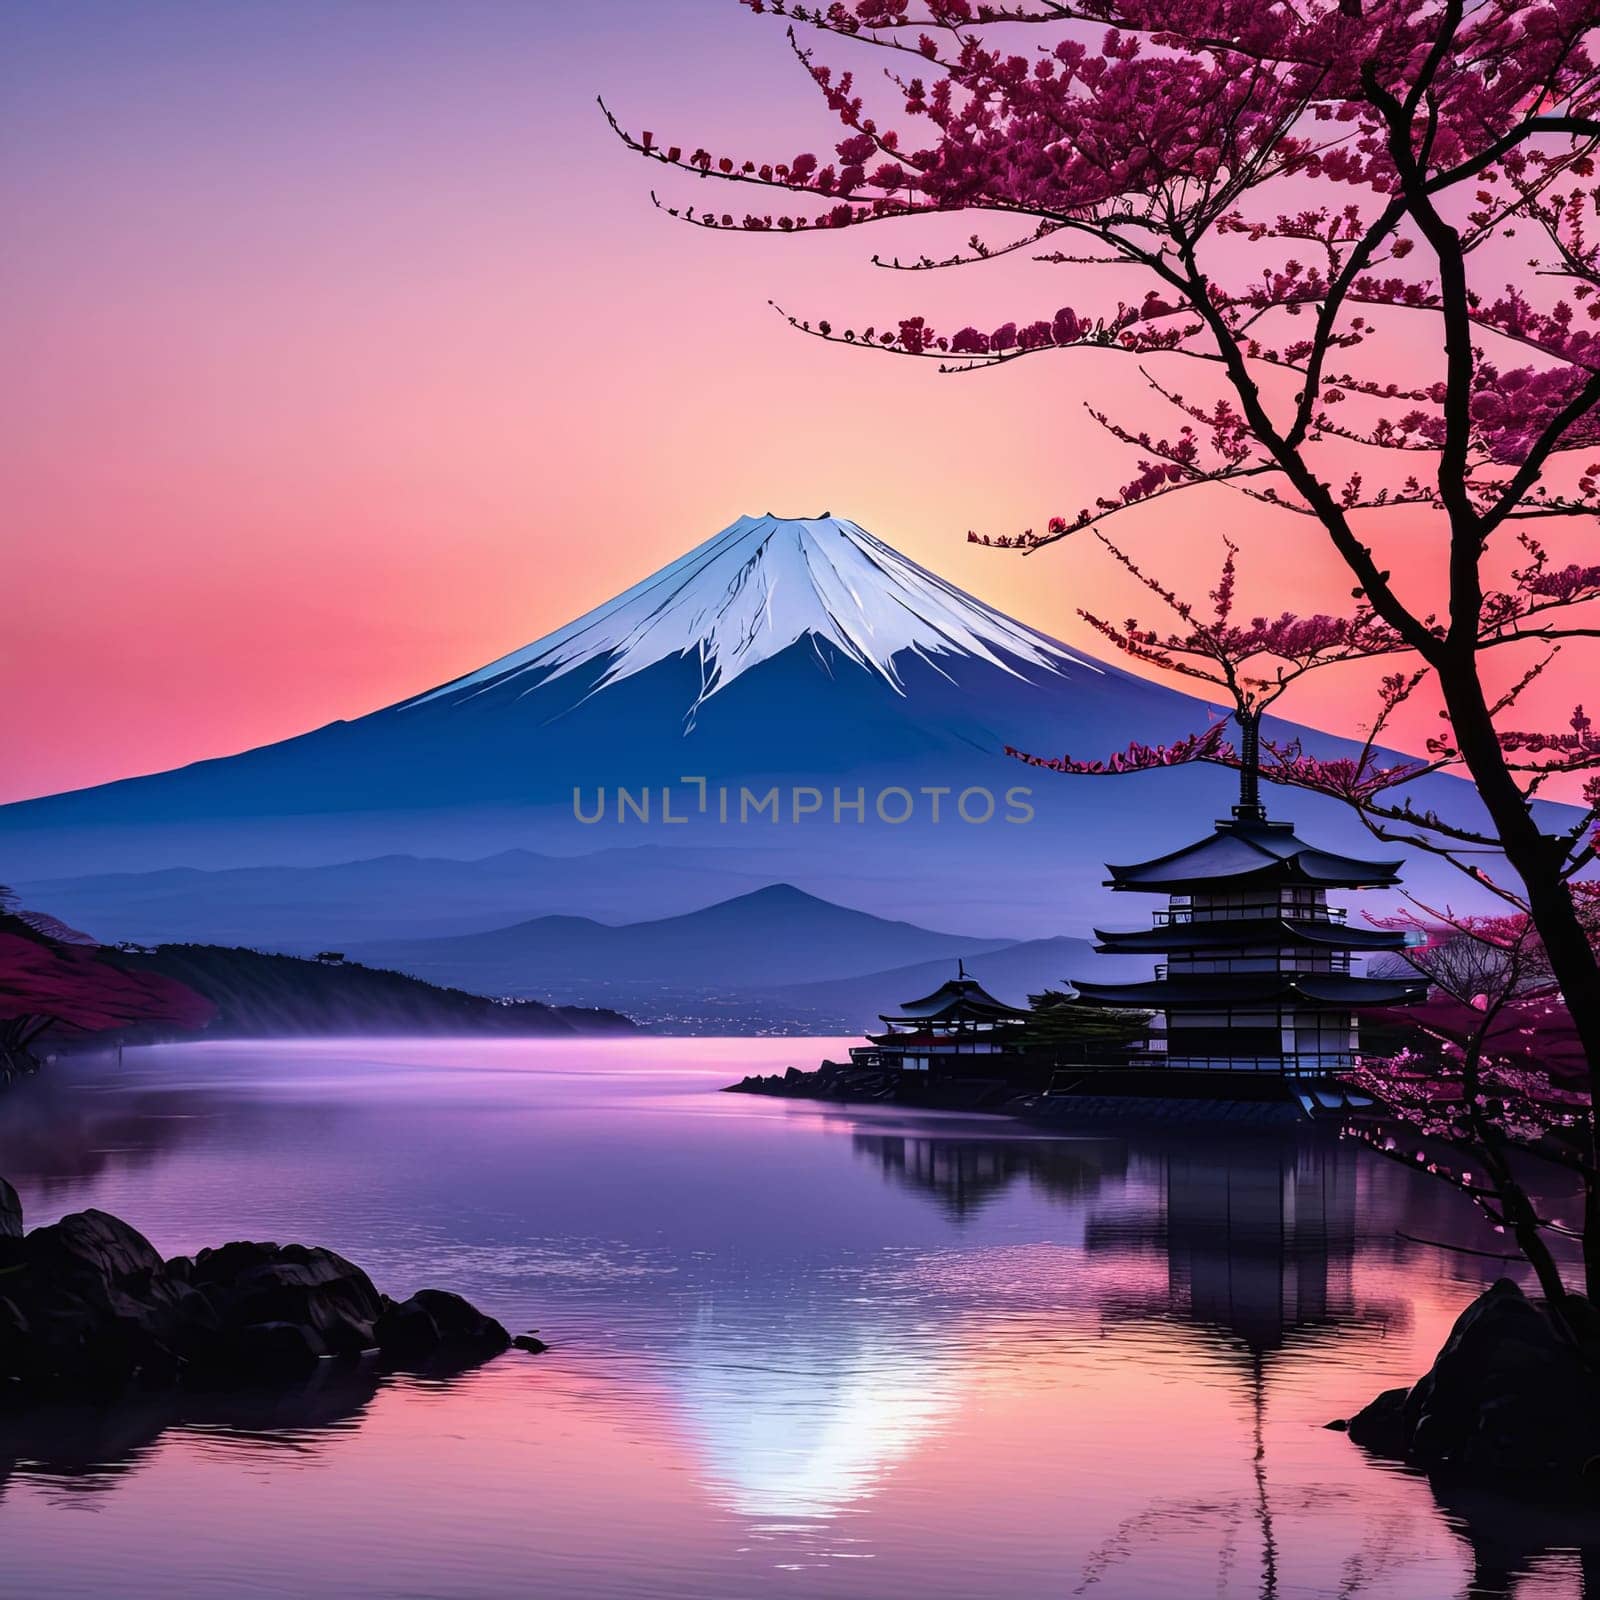 Serene landscape with mountain, pagoda in background. Sky is filled with beautiful pink hue, and moon is shining brightly. Concept of peace, tranquility. For art, creative projects, fashion, magazines